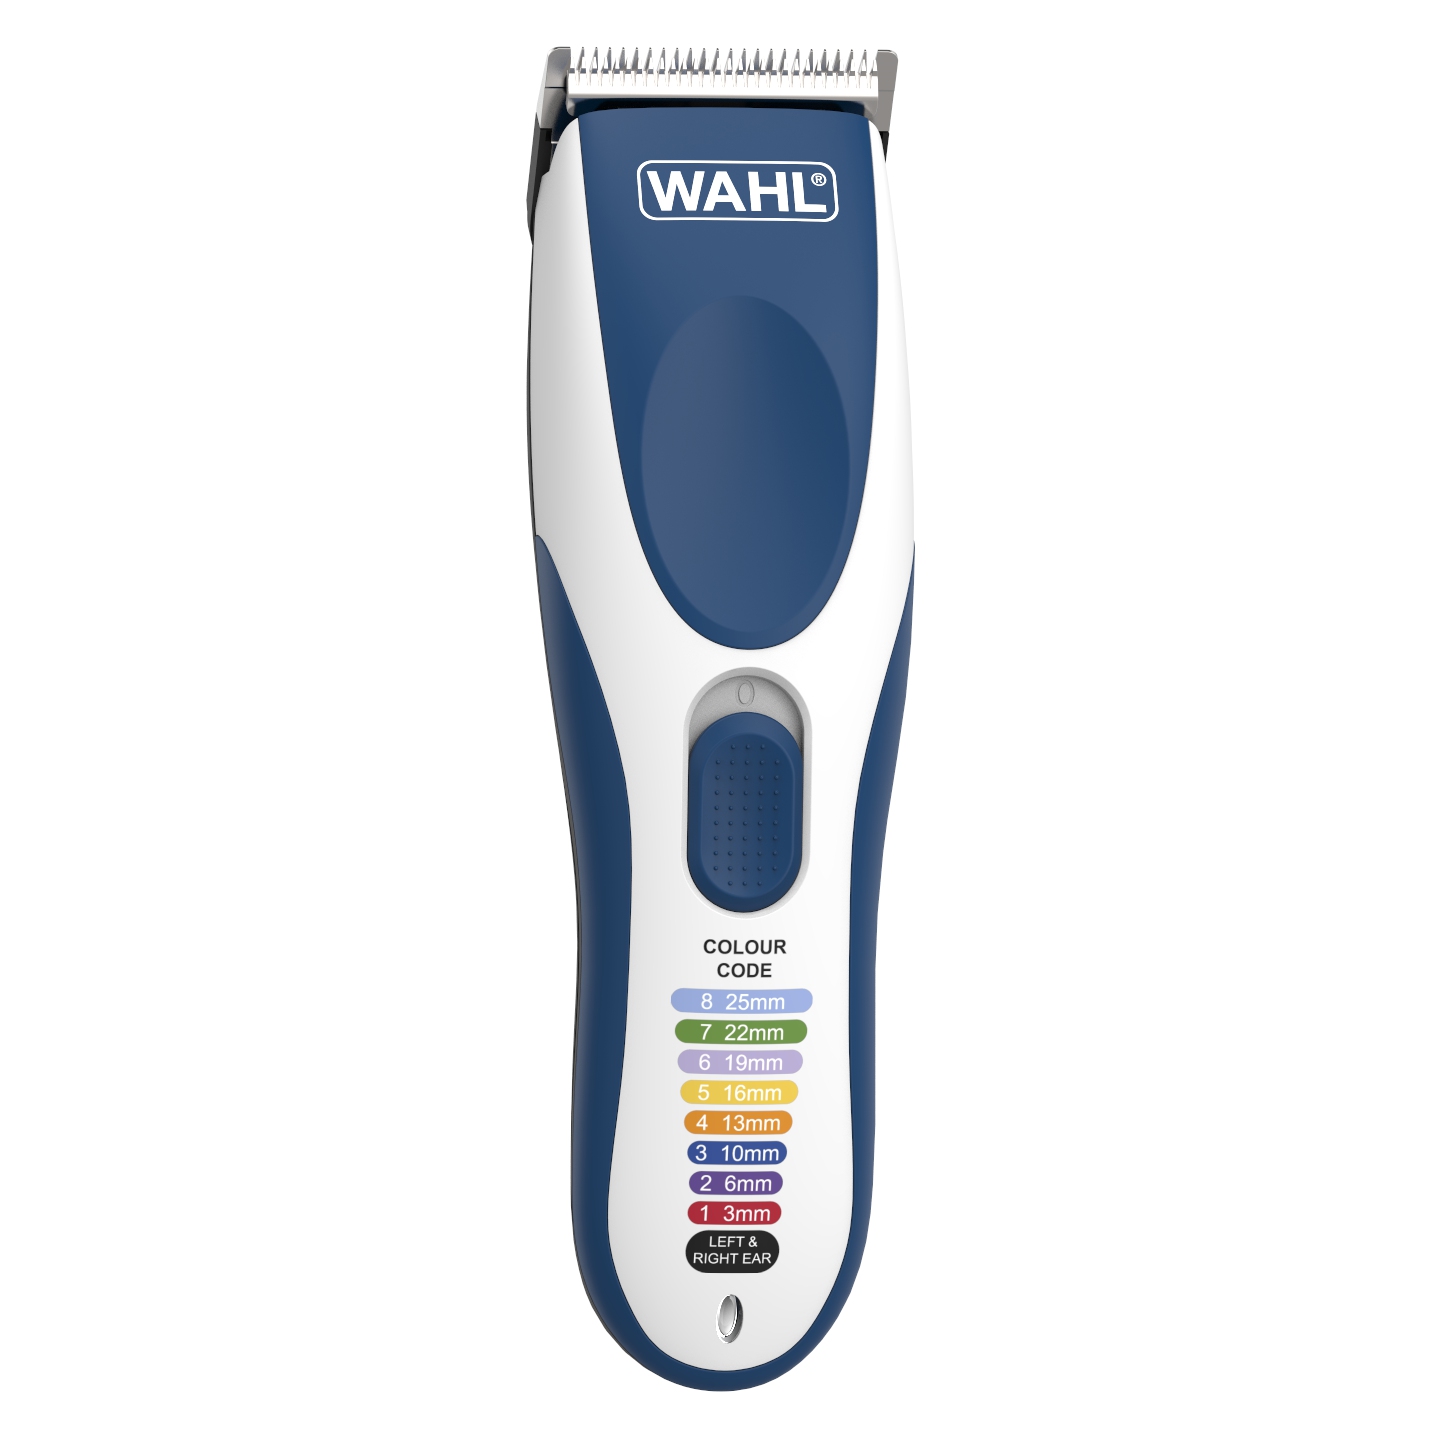 wahl color pro cordless not cutting